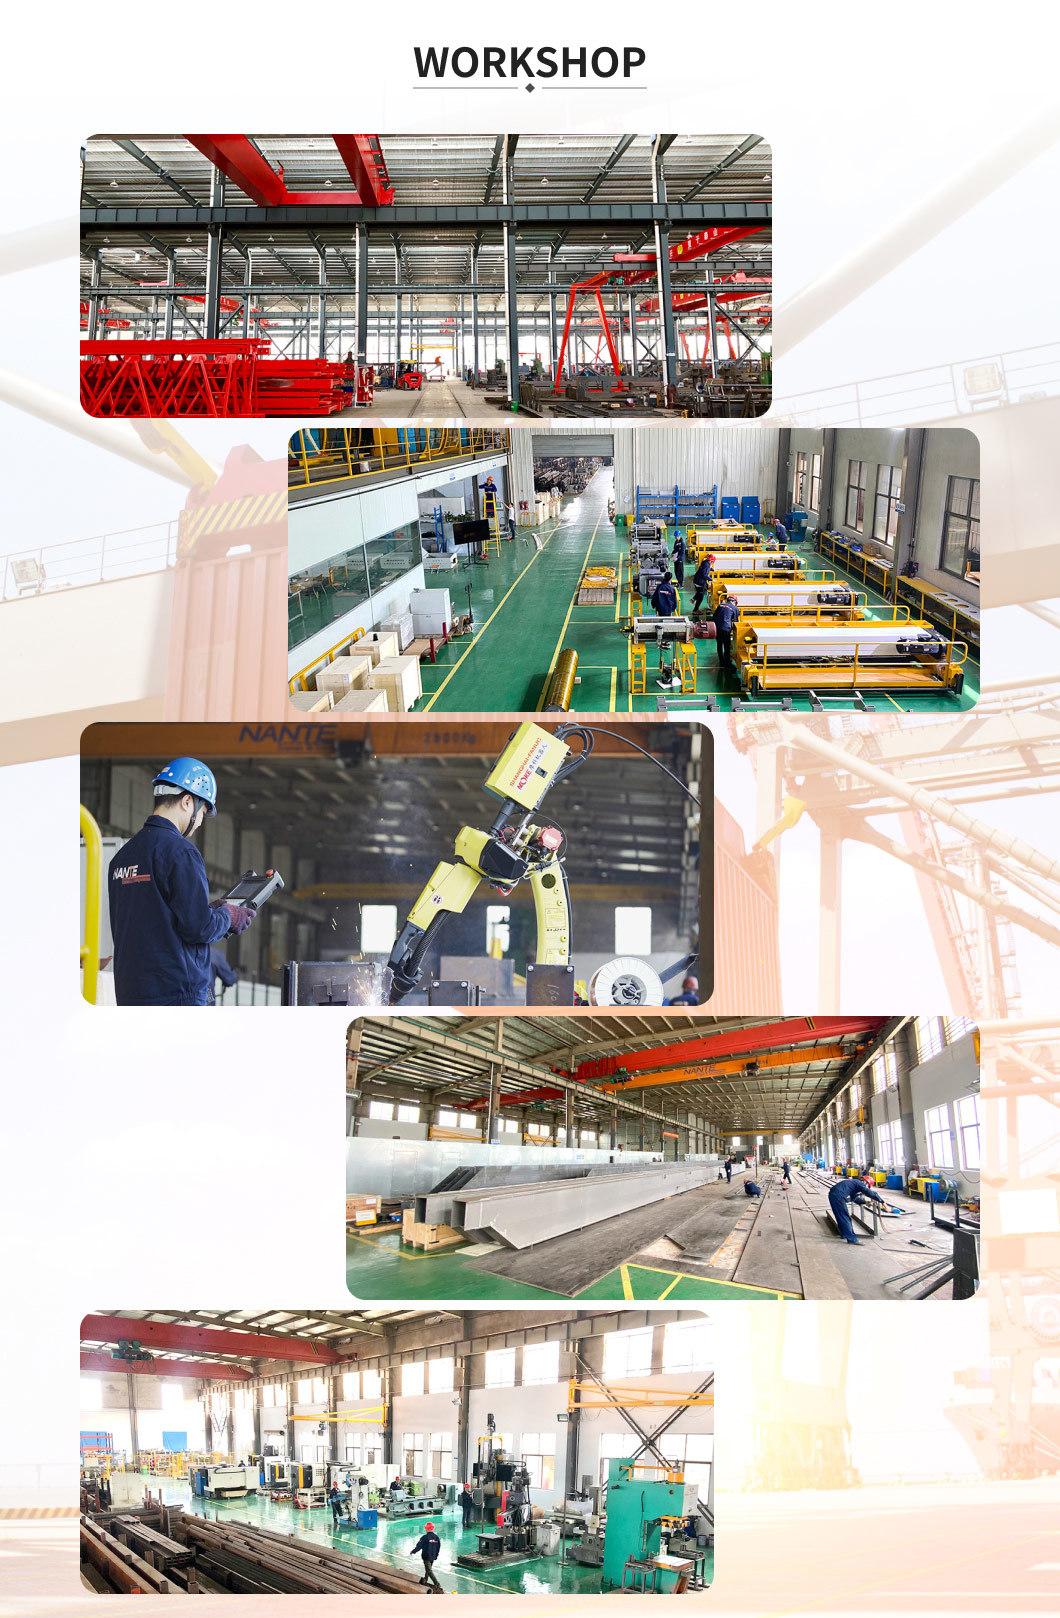 Reliable Supplier CE Approved European Standard Gantry Crane